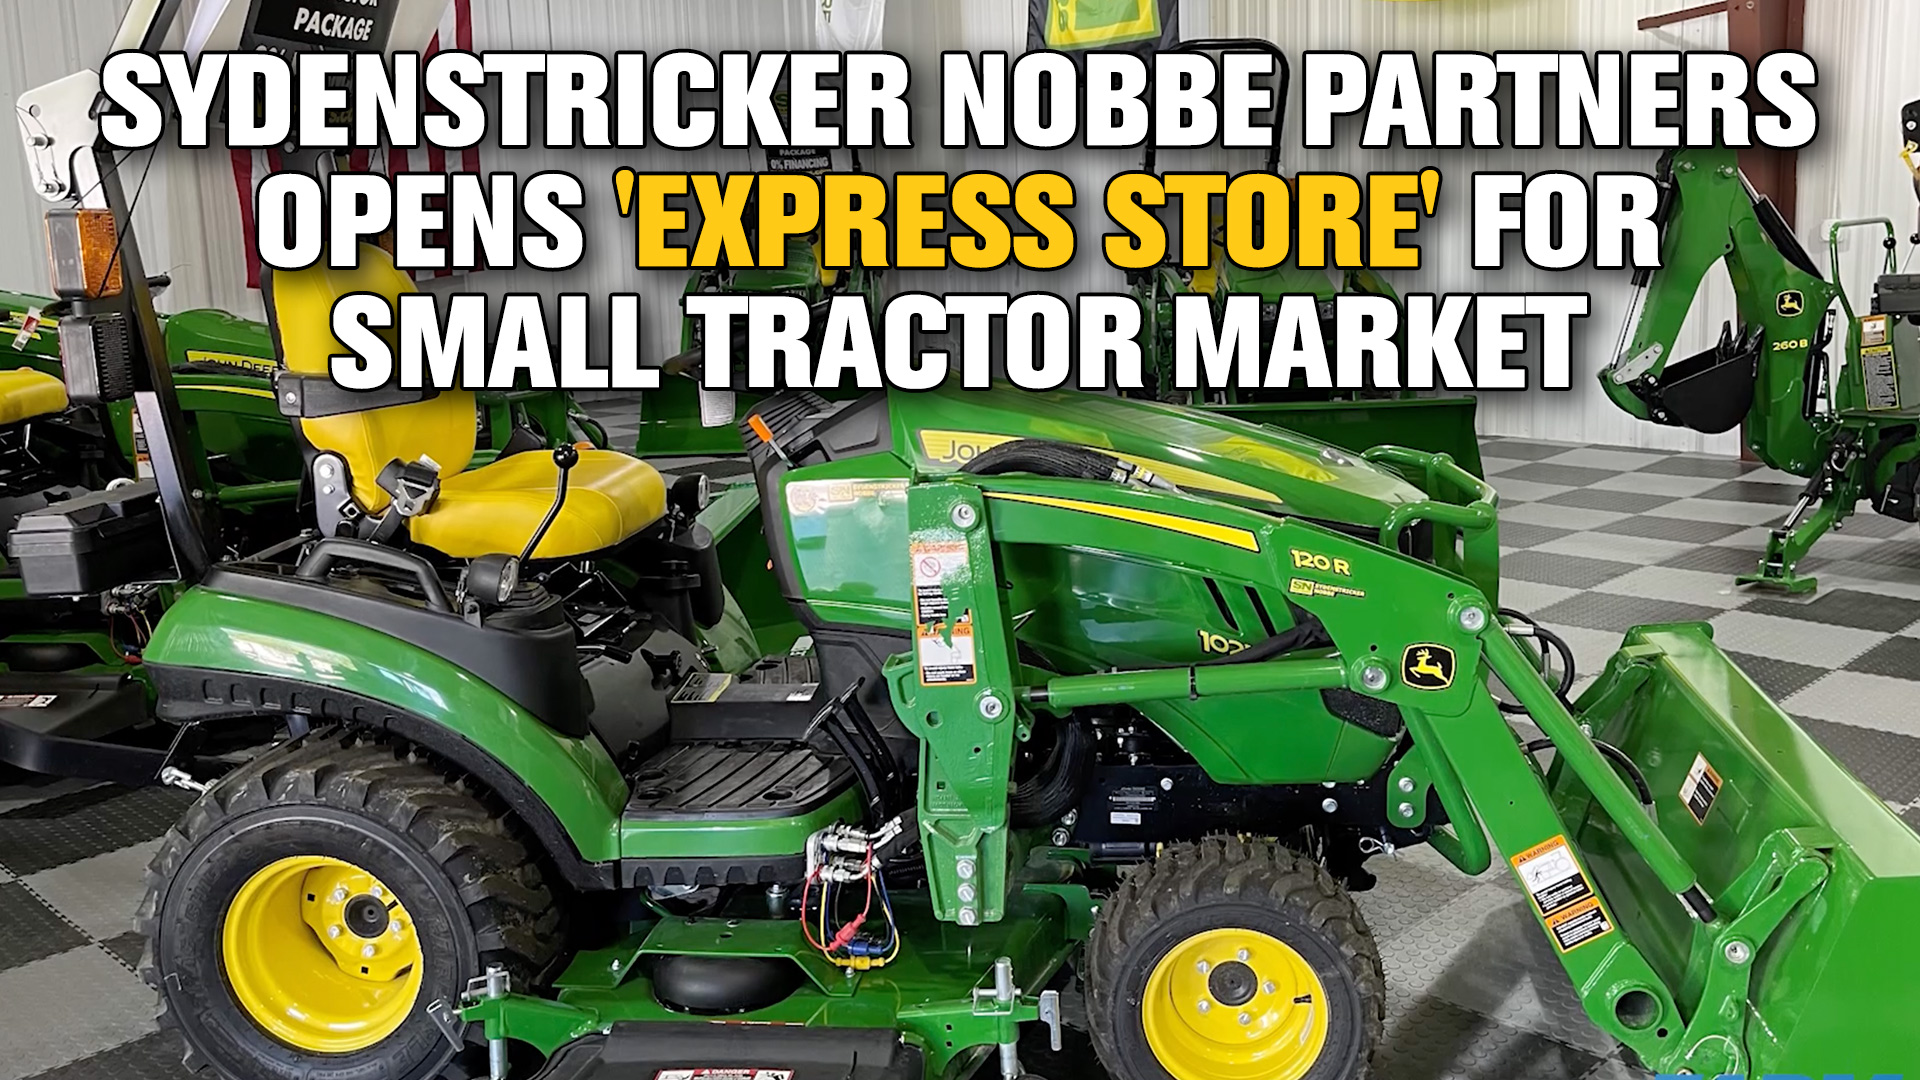 2-Sydenstricker-Nobbe-Partners-Opens-Express-Store-for-Small-Tractor-Market.jpg